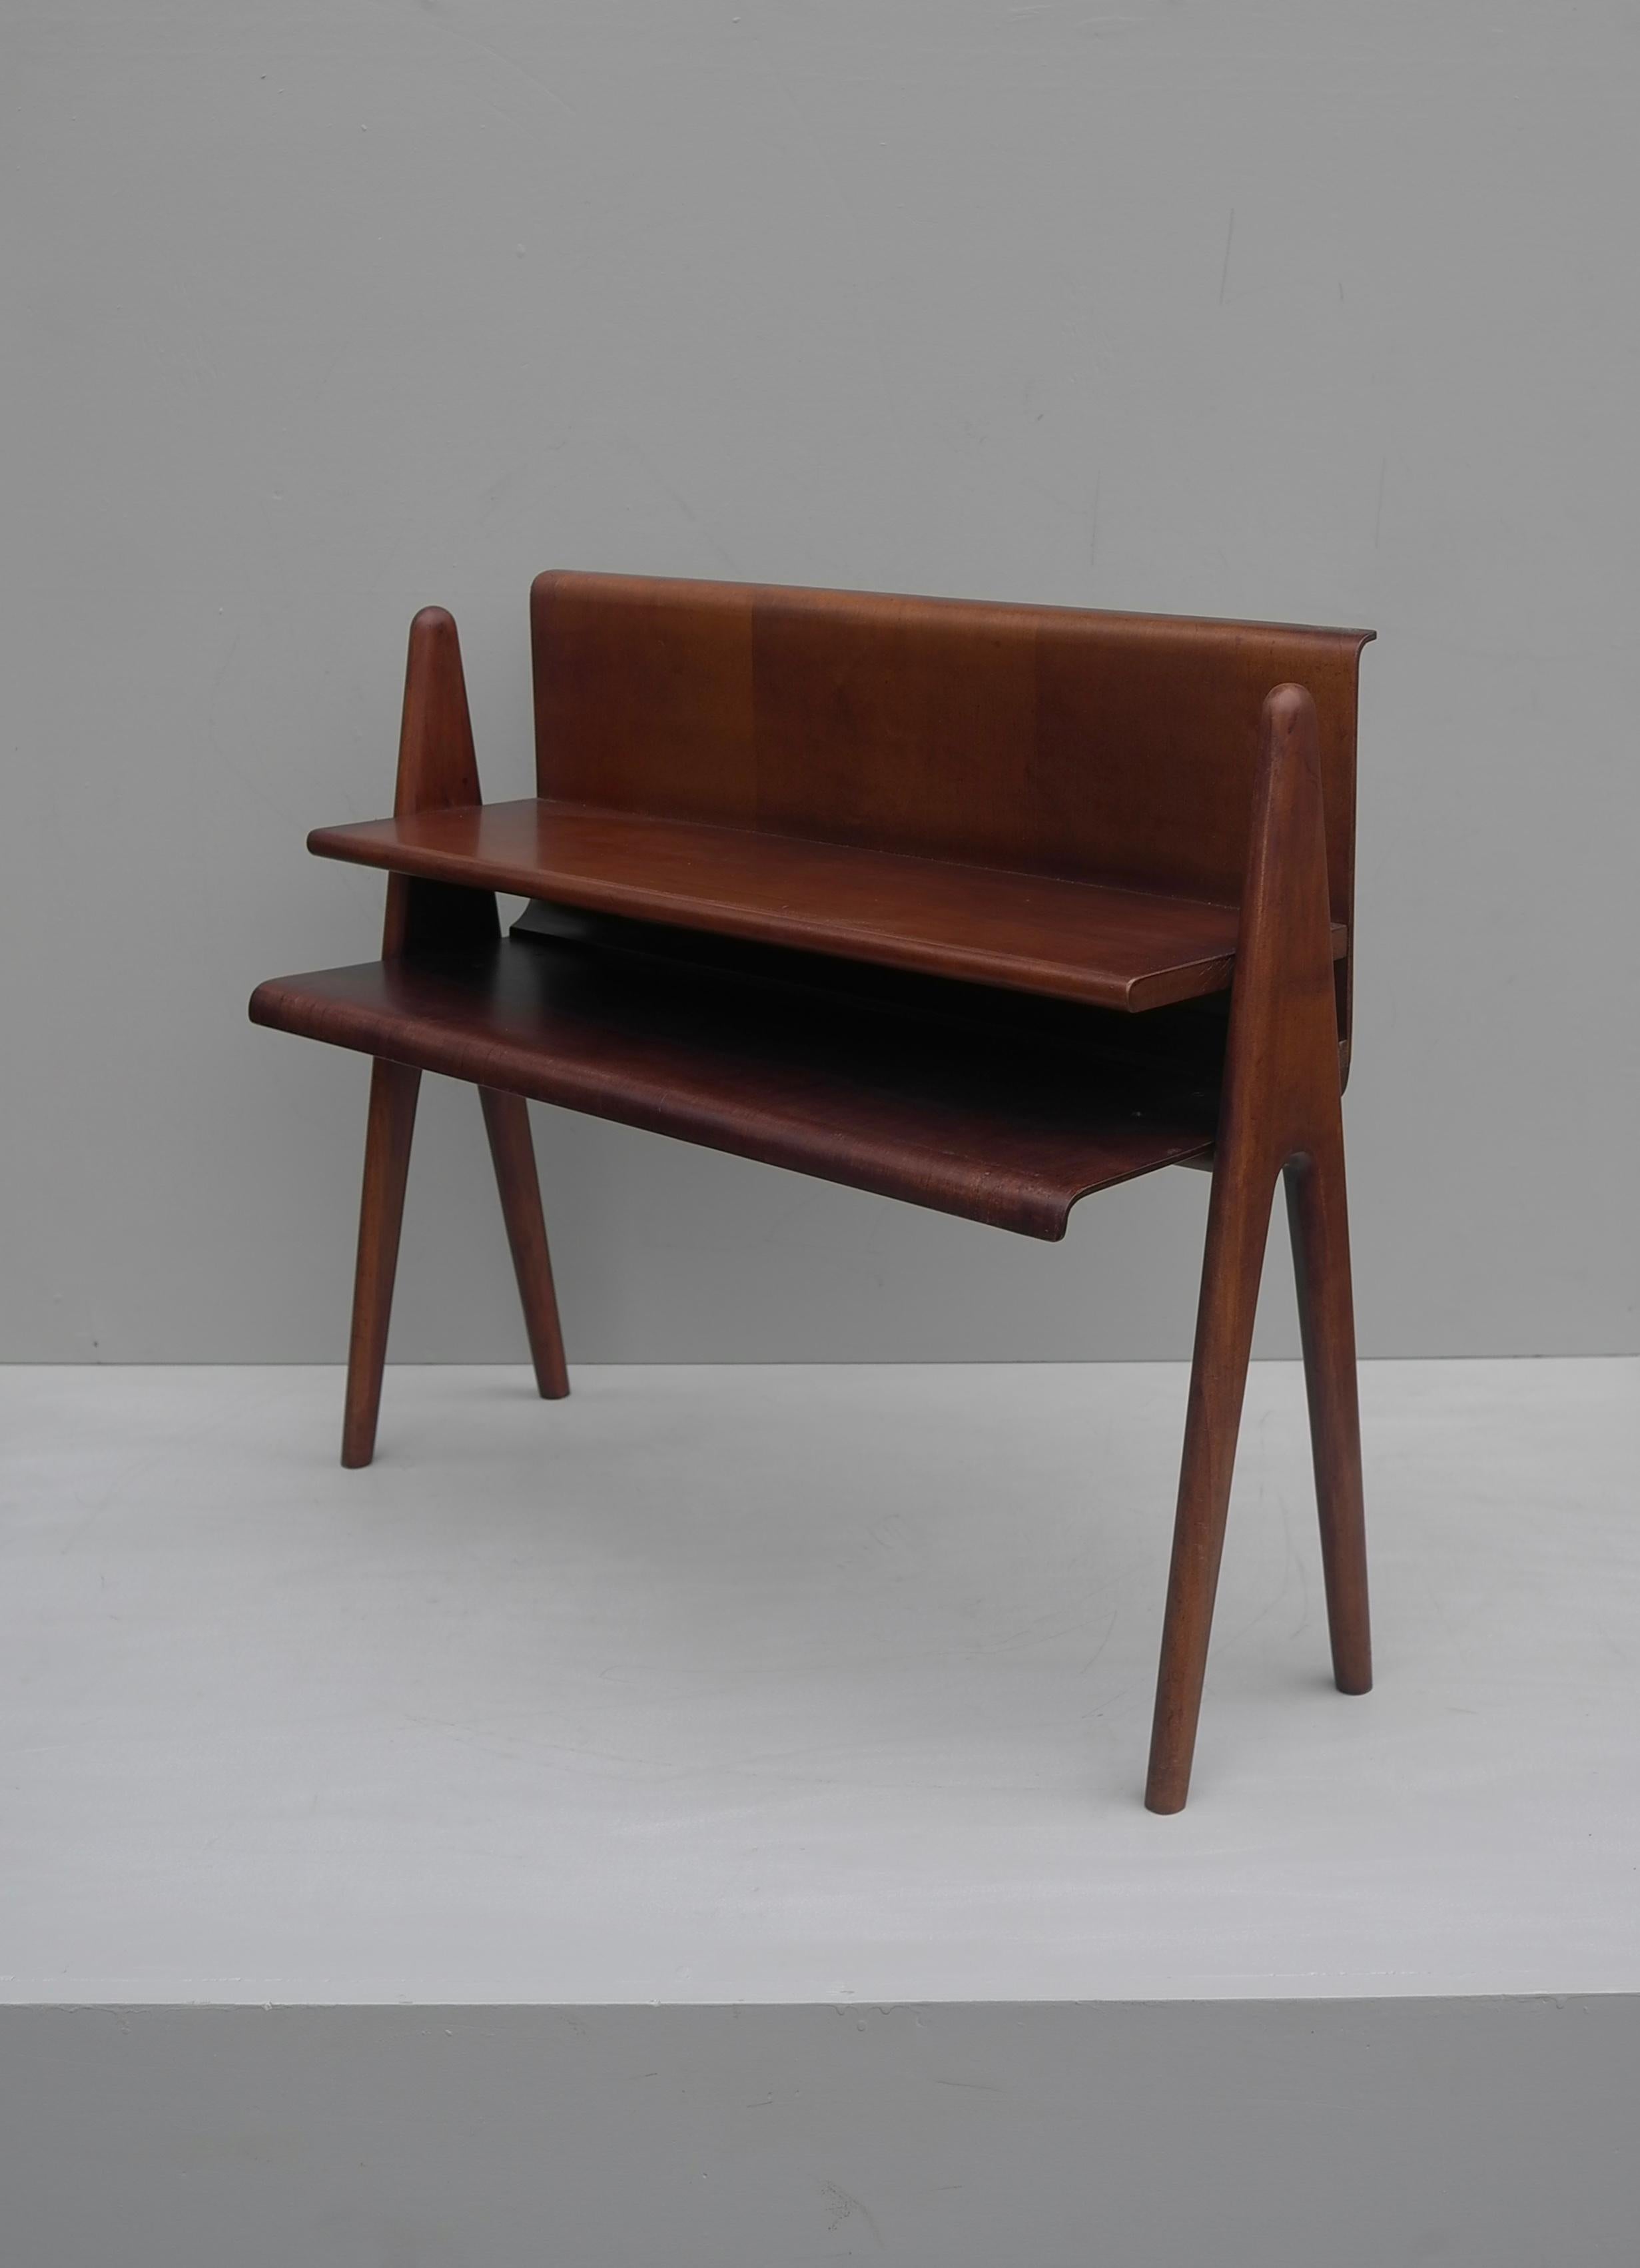 Cesare Lacca curved walnut plywood side table or book stand, Italy, 1950s.